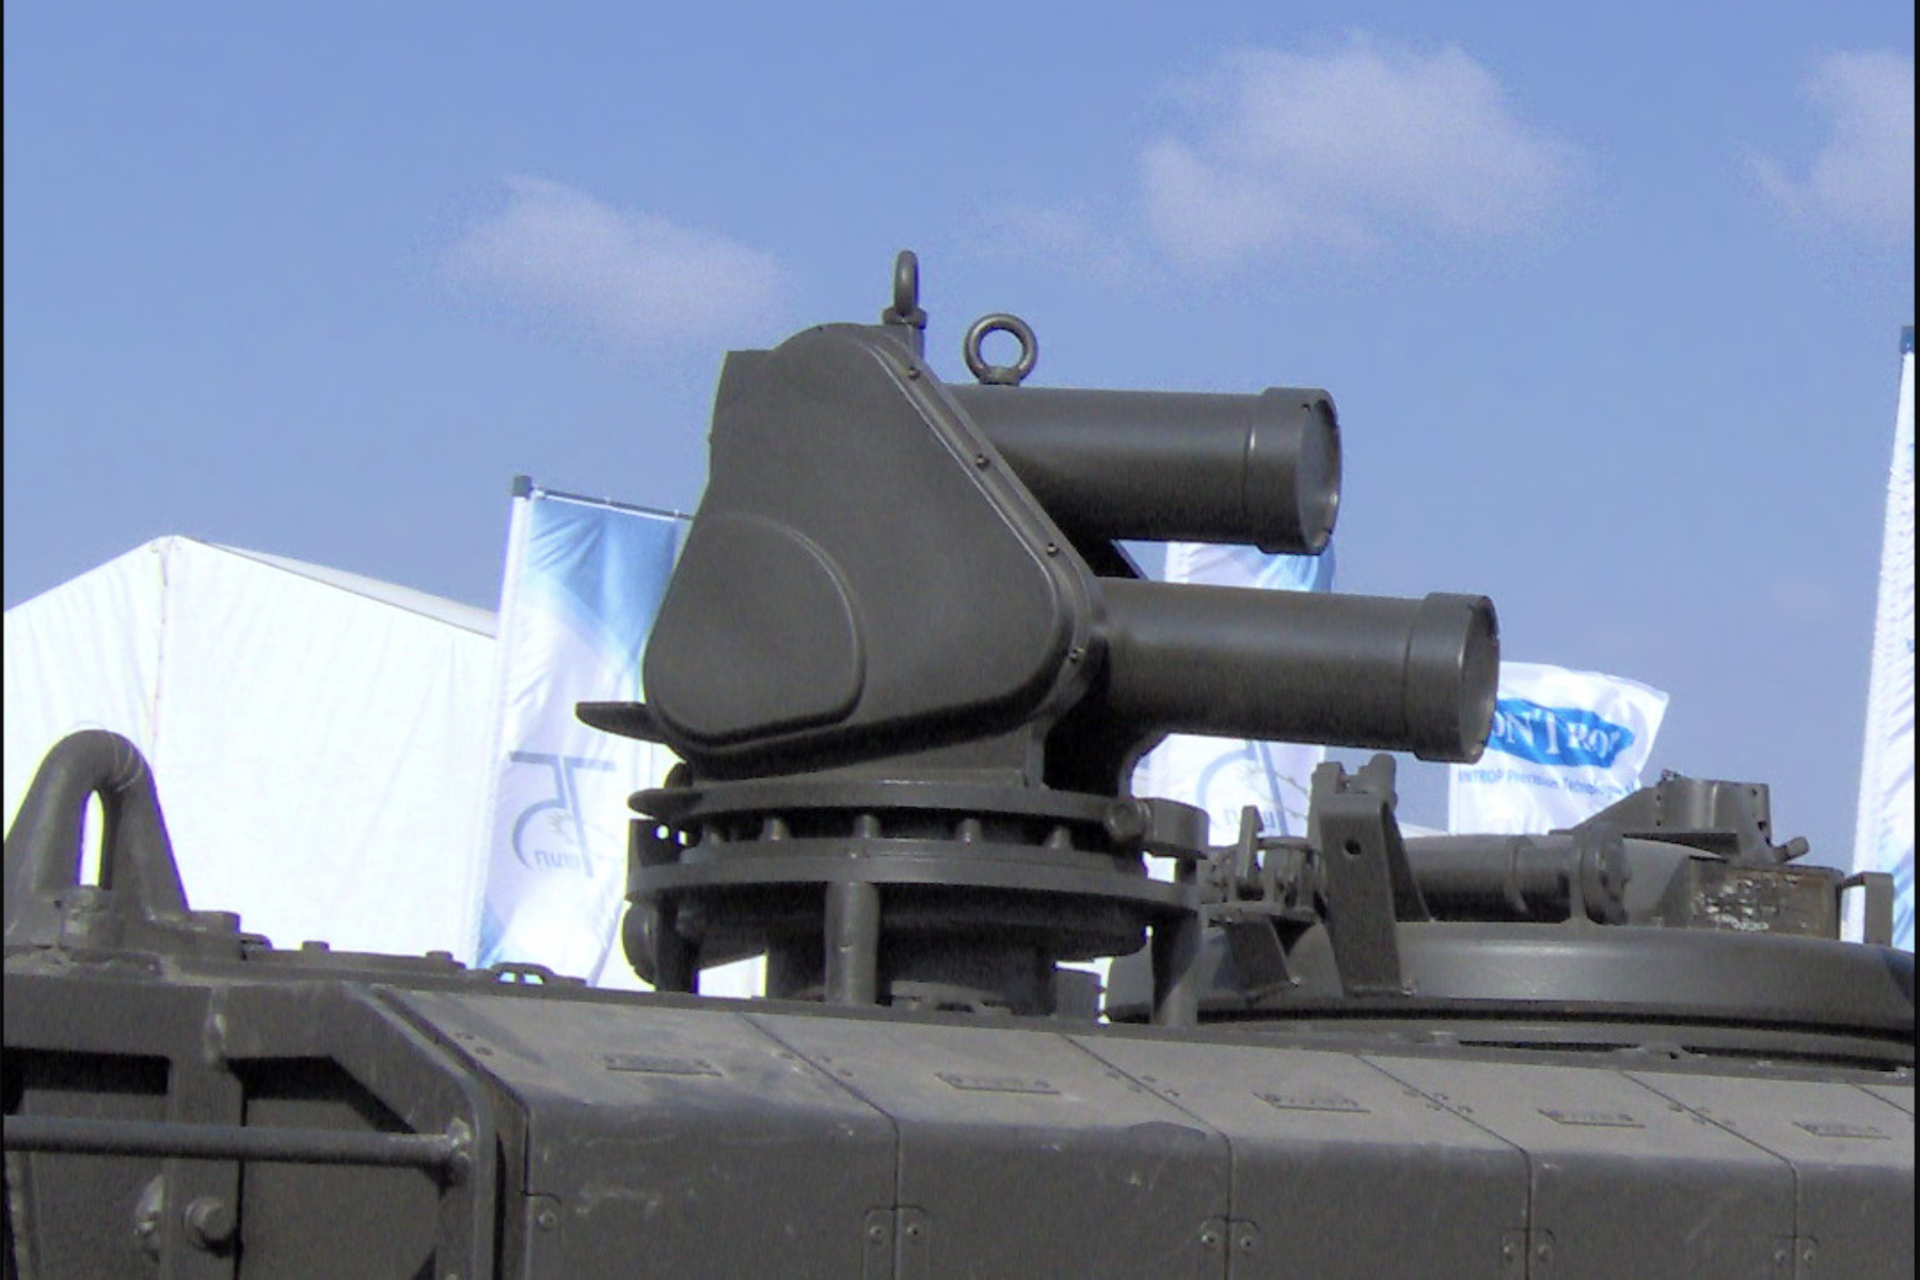 The Iron Fist Active Protection System